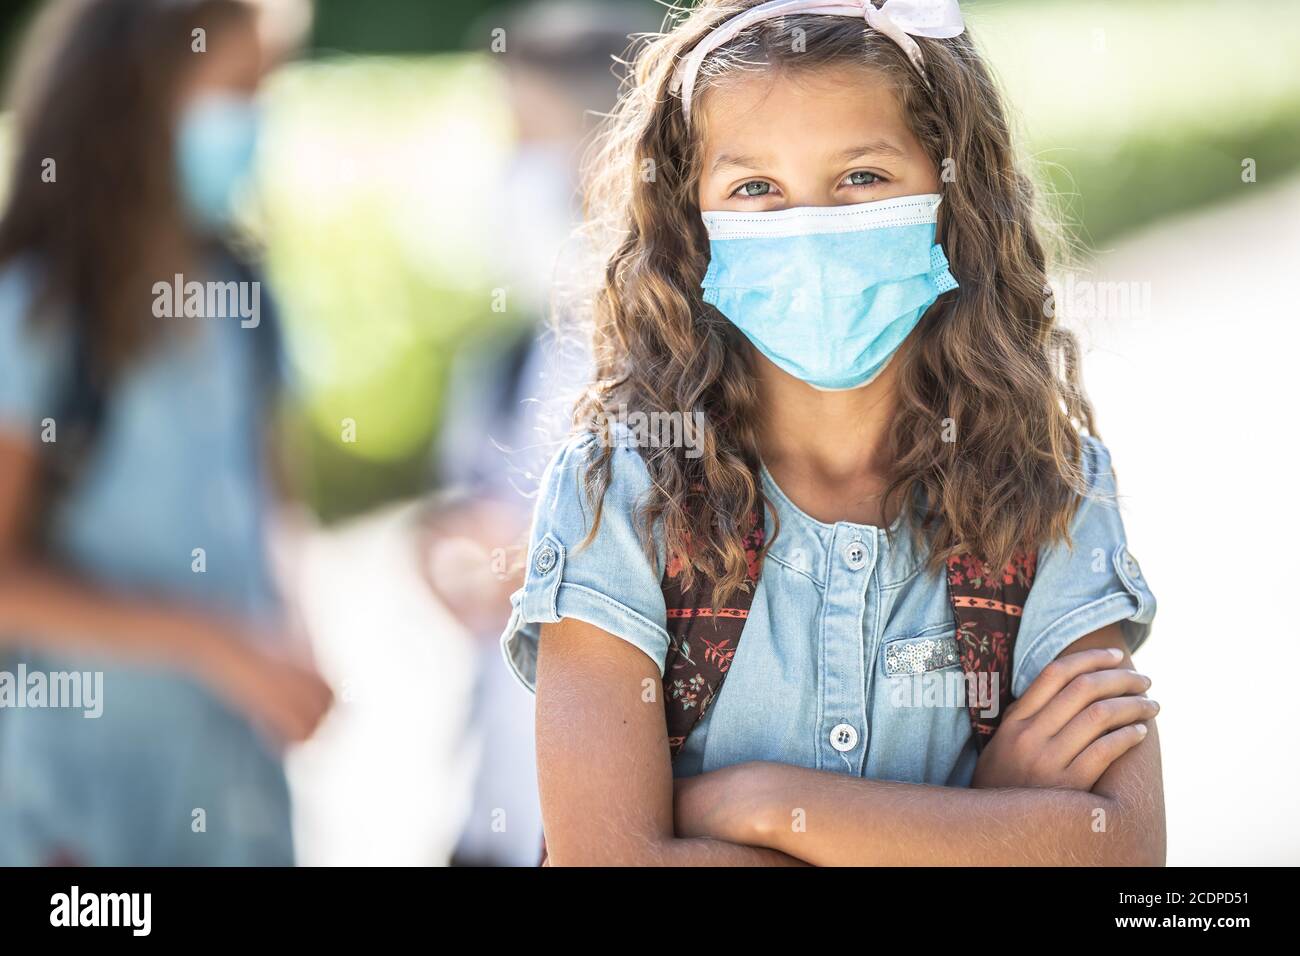 Portrait of a school girl with face mask during Covid-19 quarantine. Stock Photo